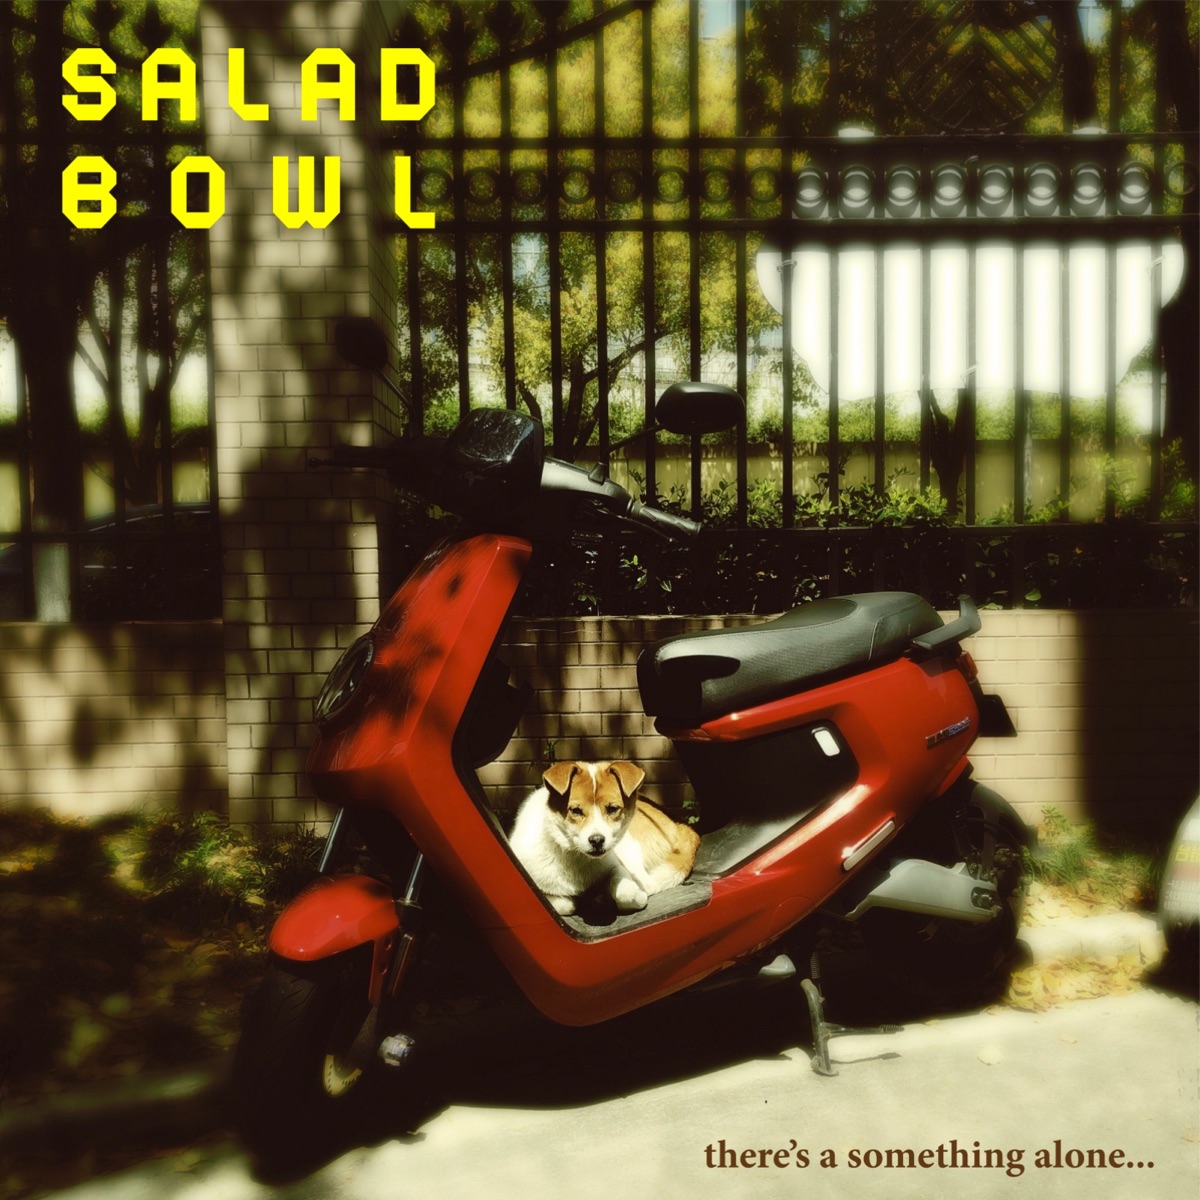 Salad Bowl – there’s a something alone…